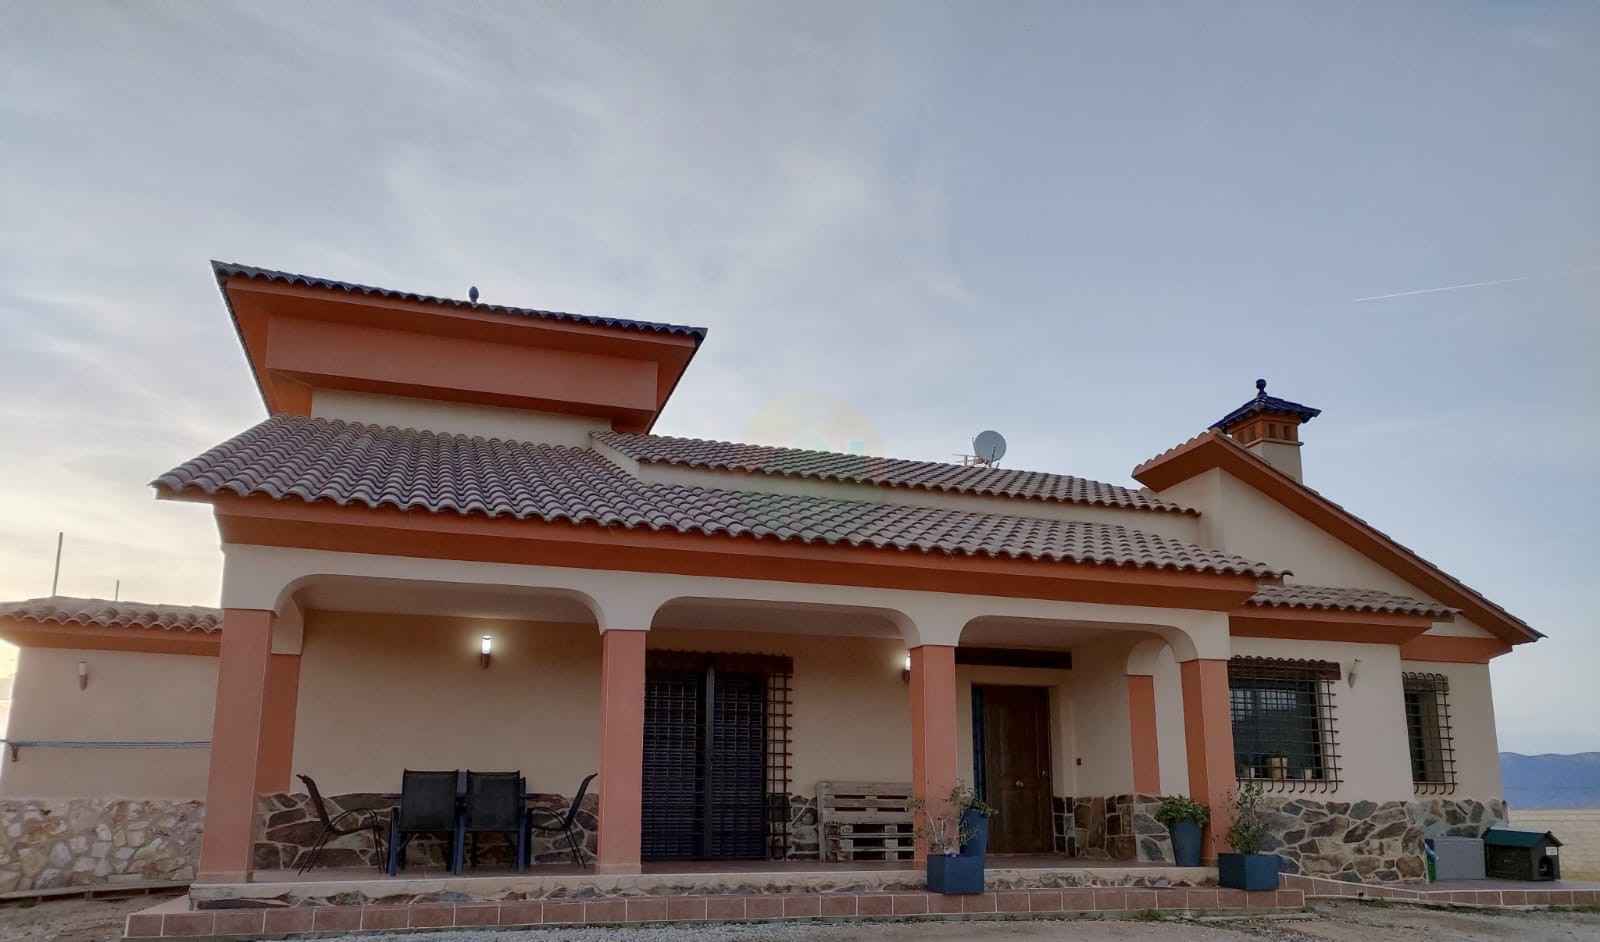 4 Bedroom country house For sale - Lorca